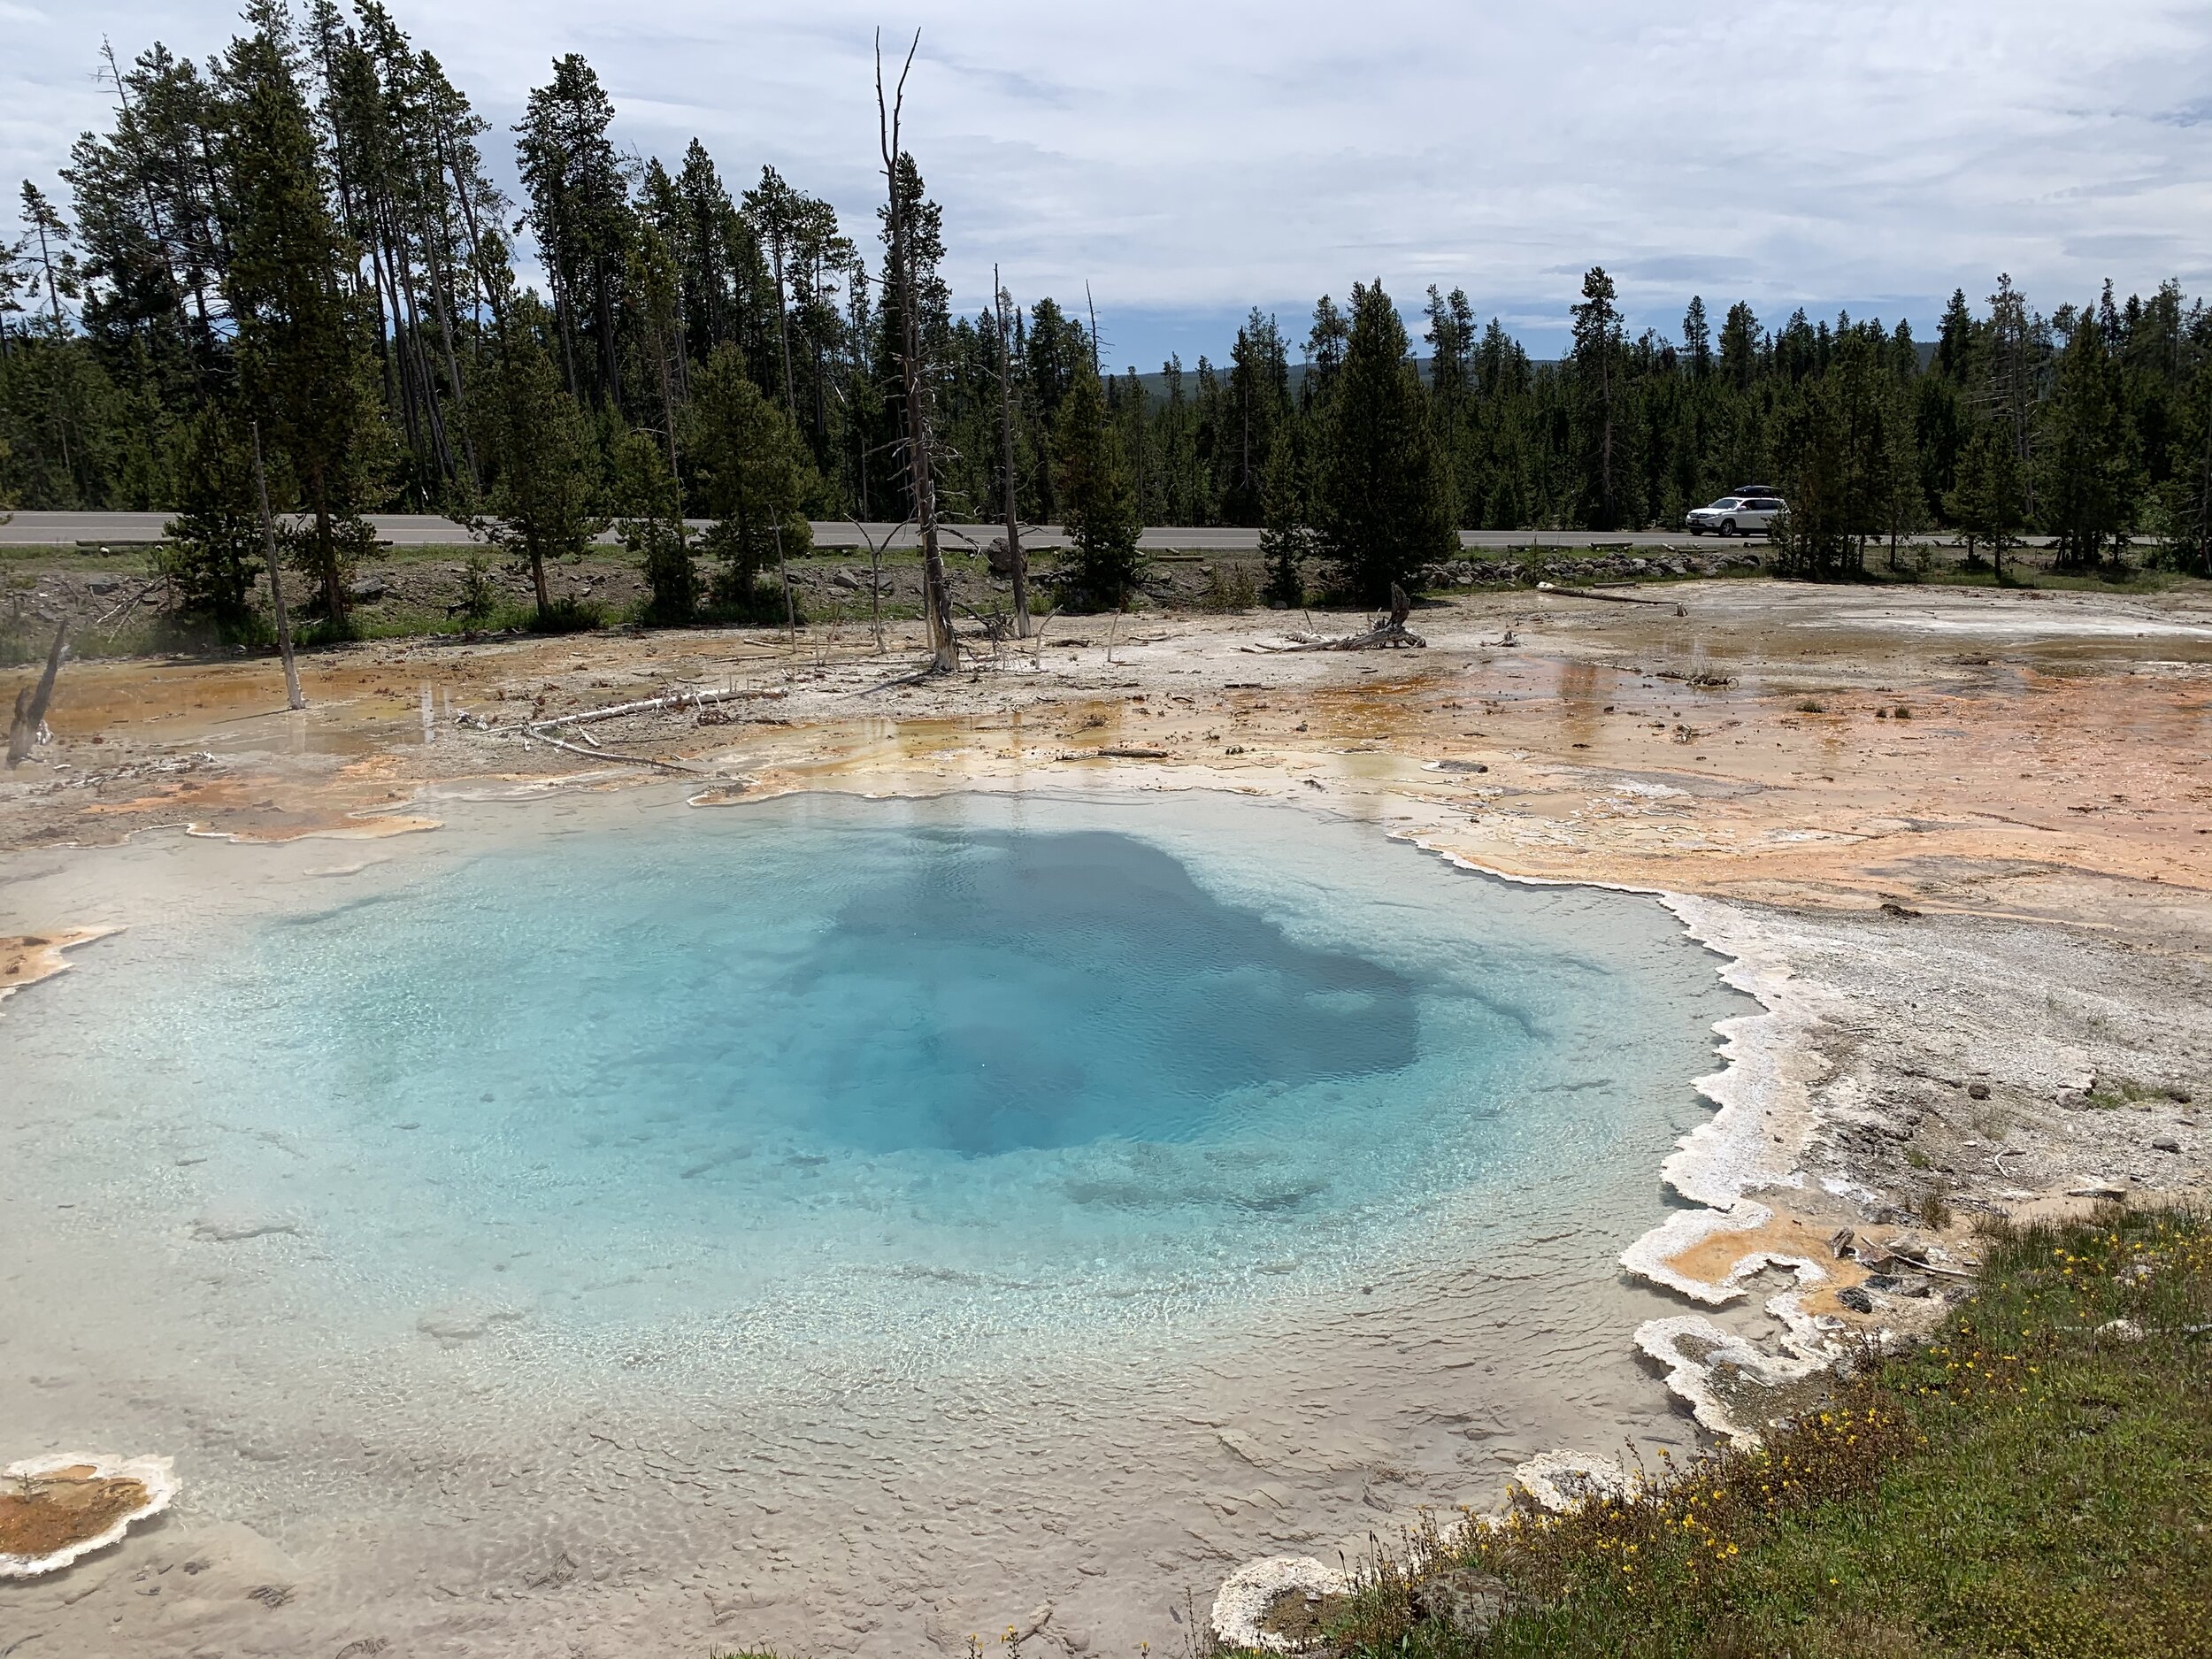  The colorful hot springs and pools of Yellowstone NP are always interesting. 